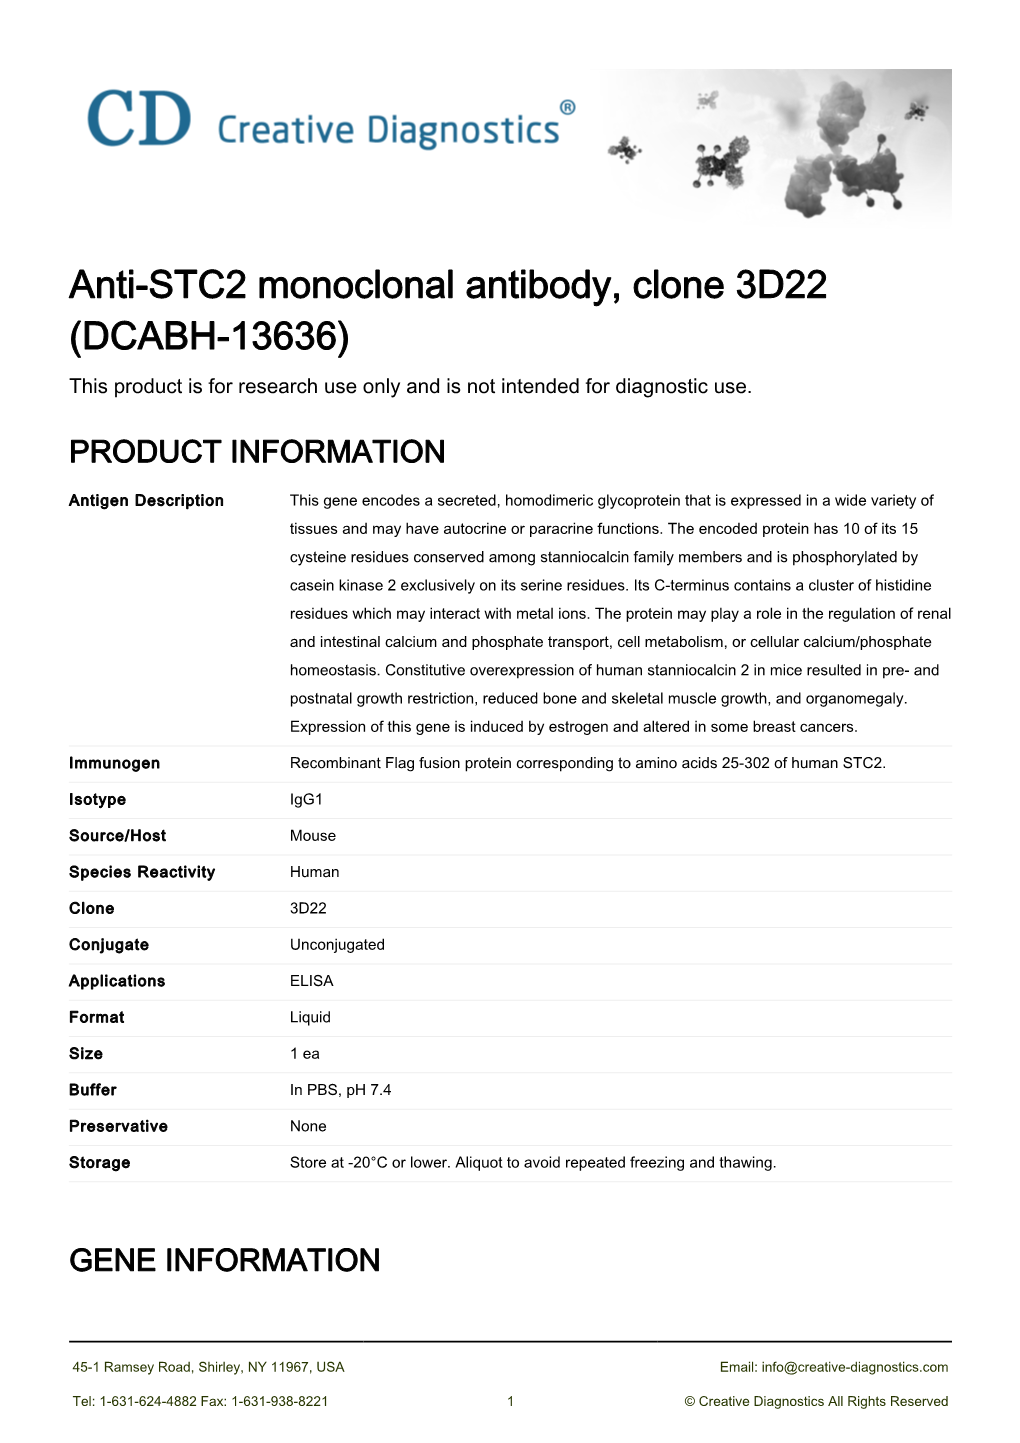 Anti-STC2 Monoclonal Antibody, Clone 3D22 (DCABH-13636) This Product Is for Research Use Only and Is Not Intended for Diagnostic Use